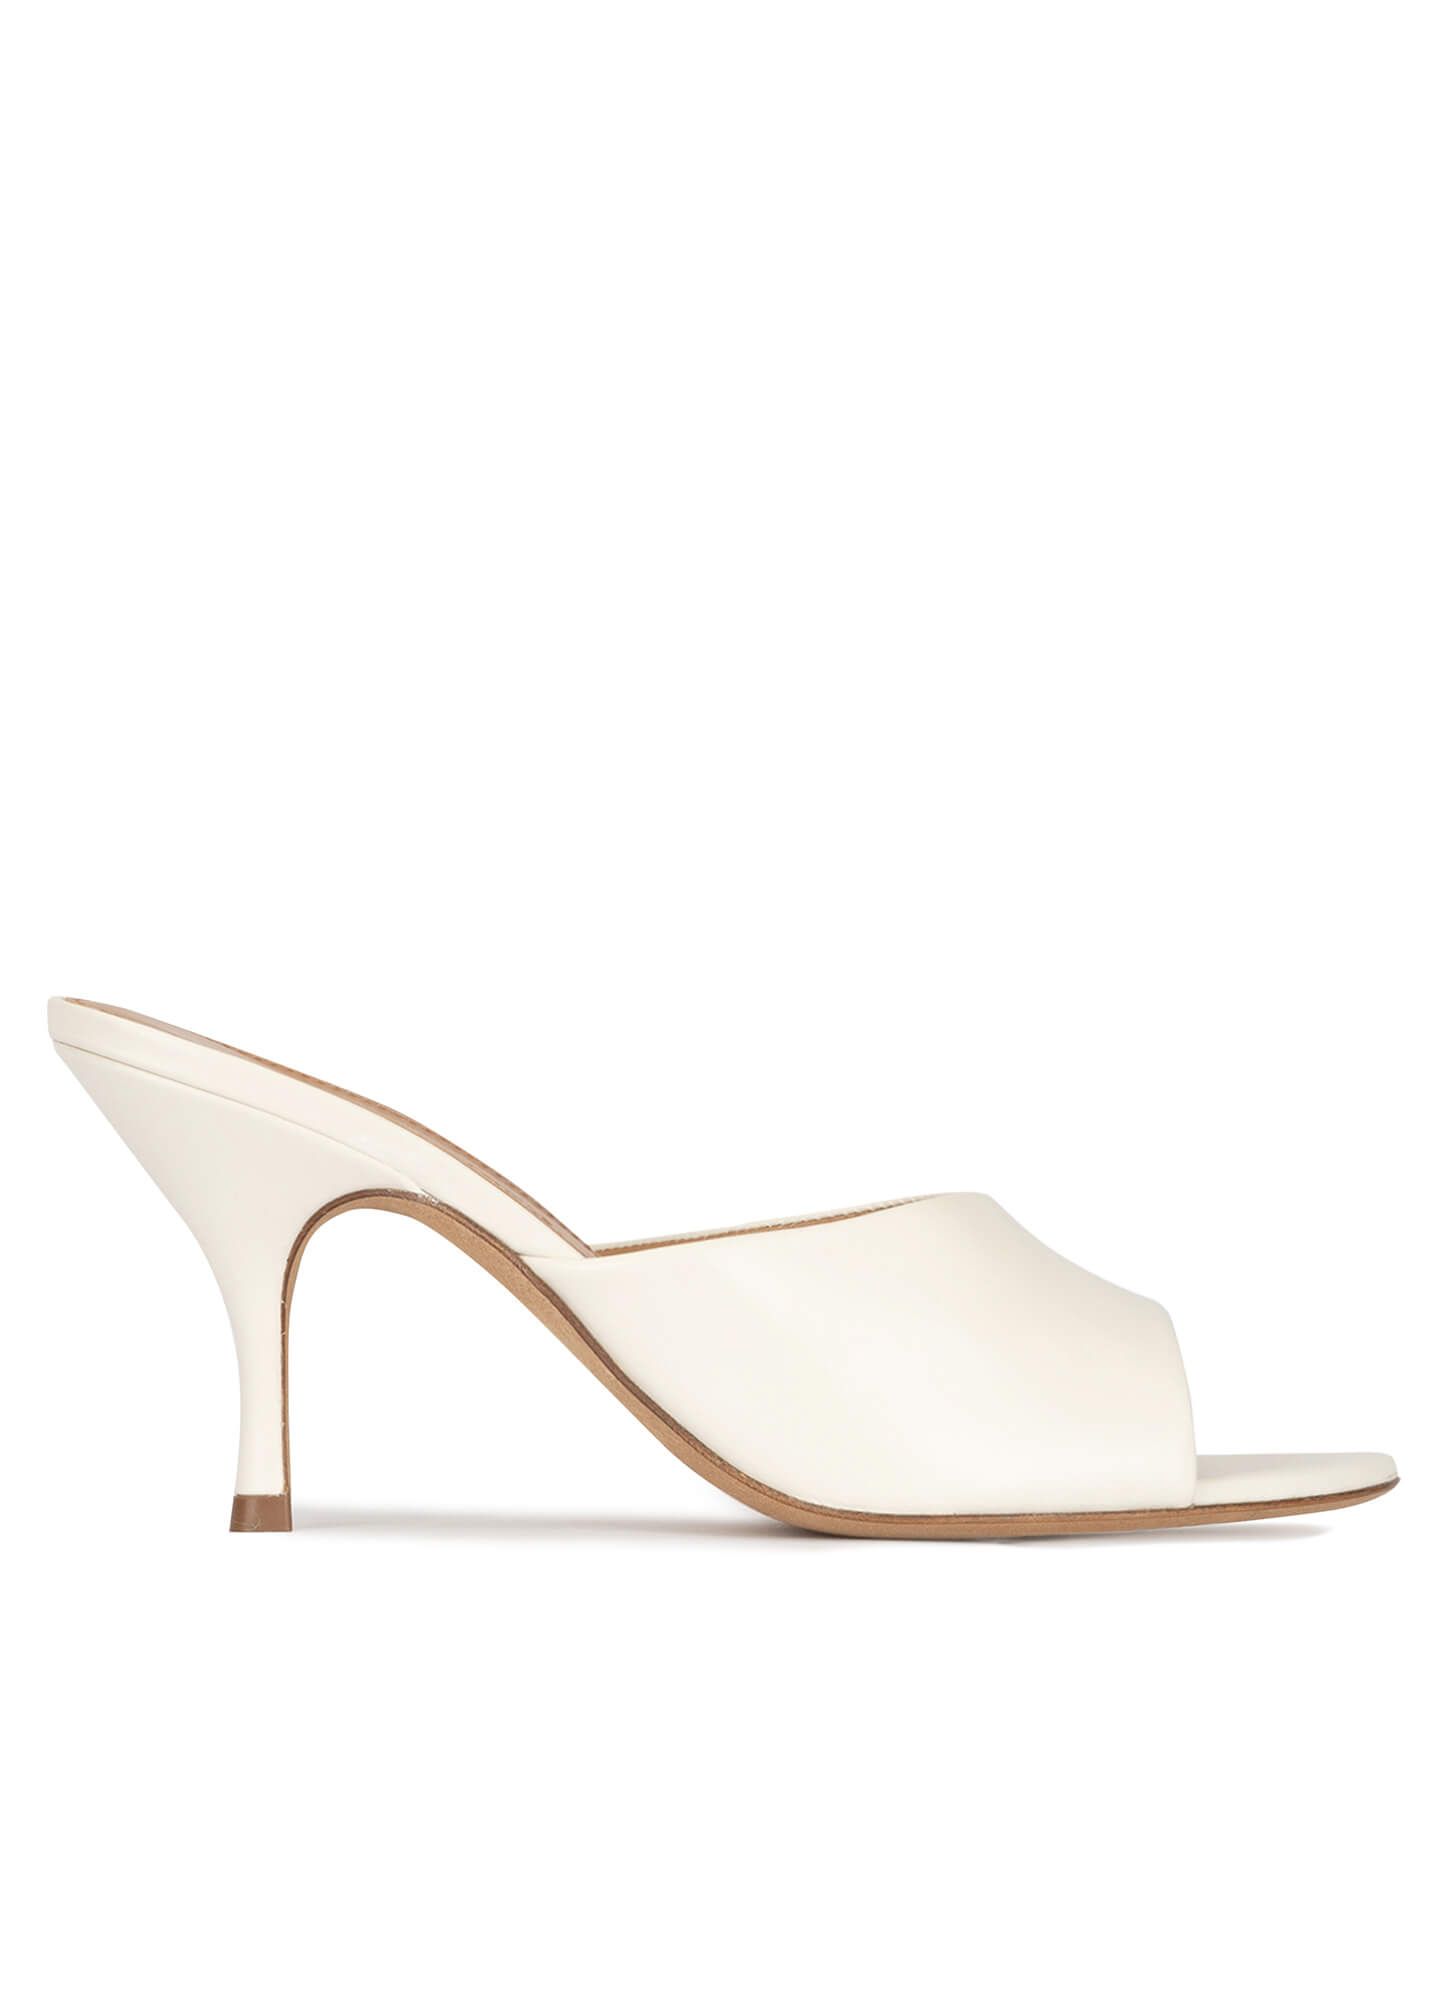 Mid curved heel mules in off-white leather . PURA LOPEZ